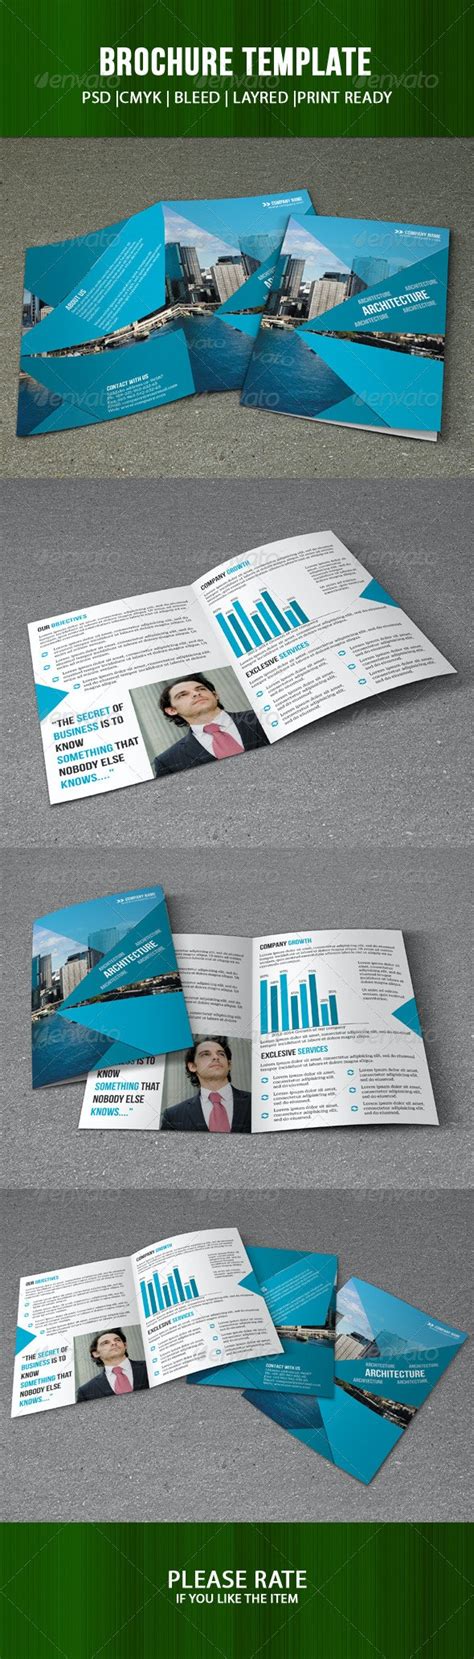 Business Brochure Template By Sistec Graphicriver